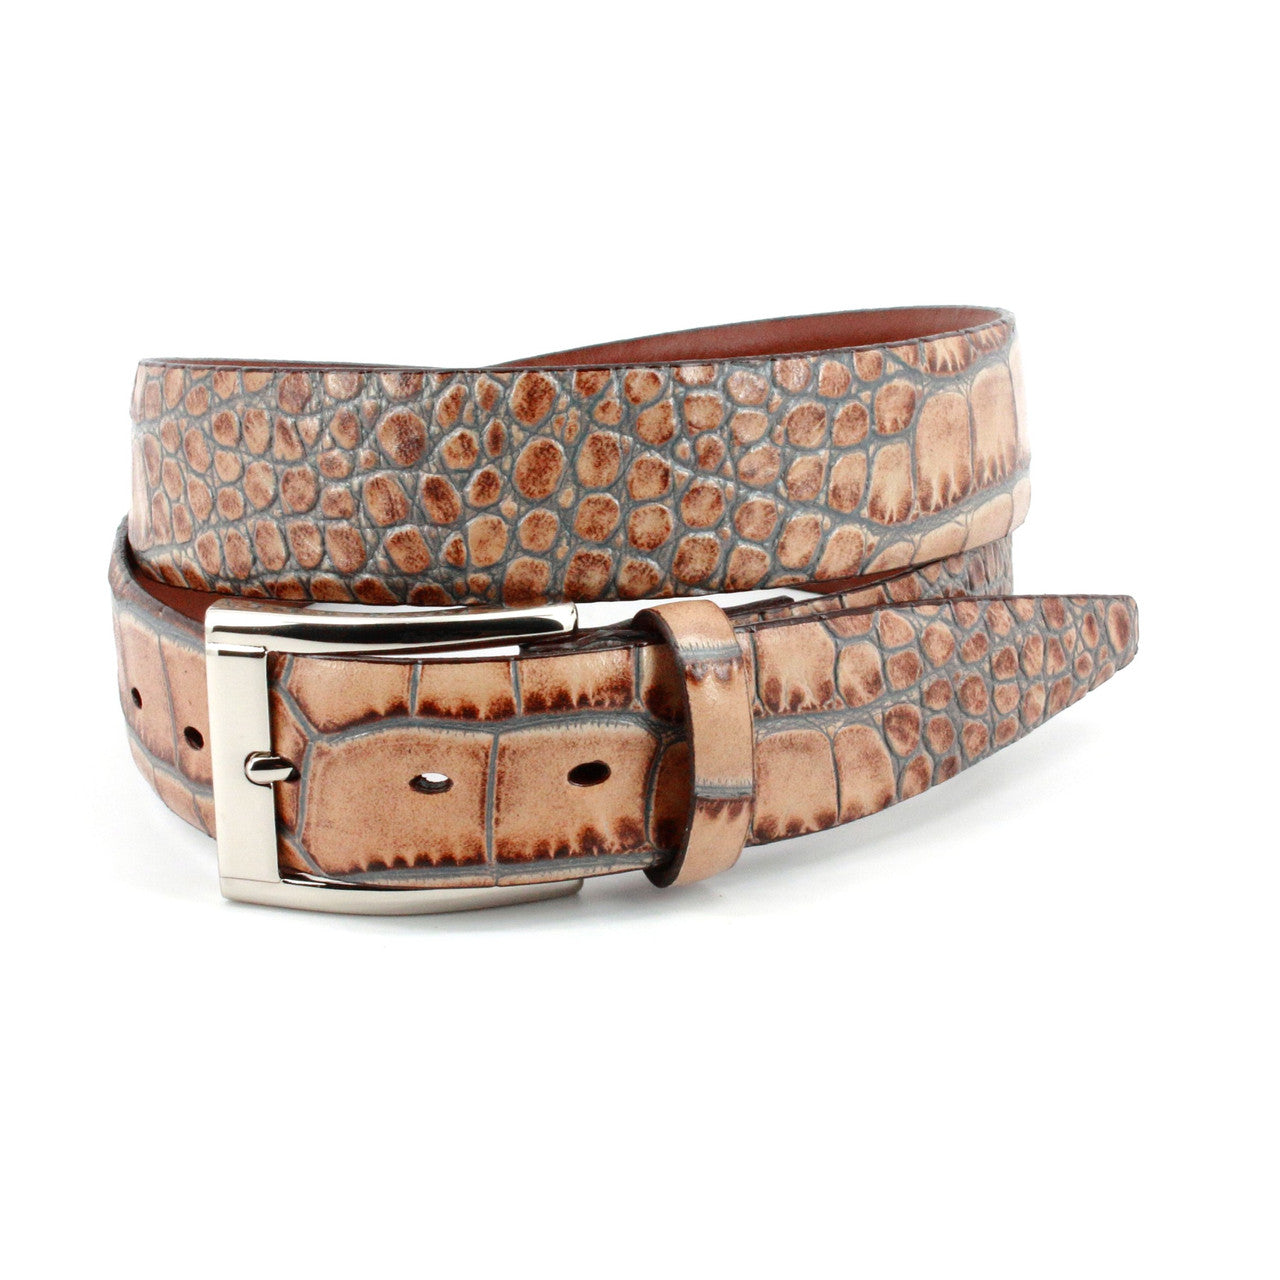 Faux Crocodile Embossed Calfskin Belt by Torino - Taupe